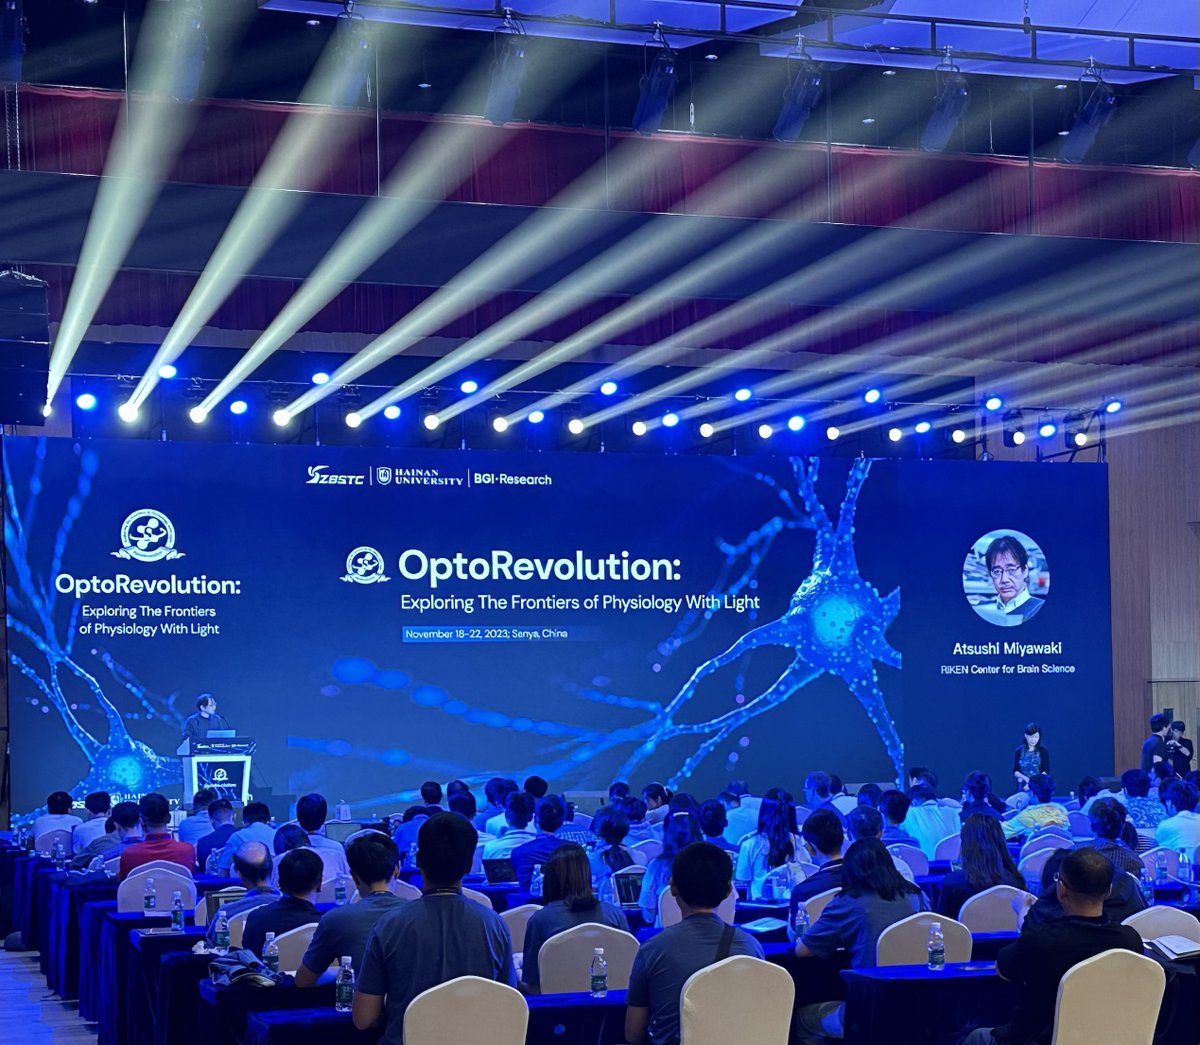 If your conference is named “OptoRevolution” it should have an impressive light display. Also this is the biggest display screen I’ve ever seen at a scientific meeting. Inspiring talks so far by Atsushi Miyawaki @jinzhanglab Robert Campbell @KarlDeisseroth Haifeng Ye and many